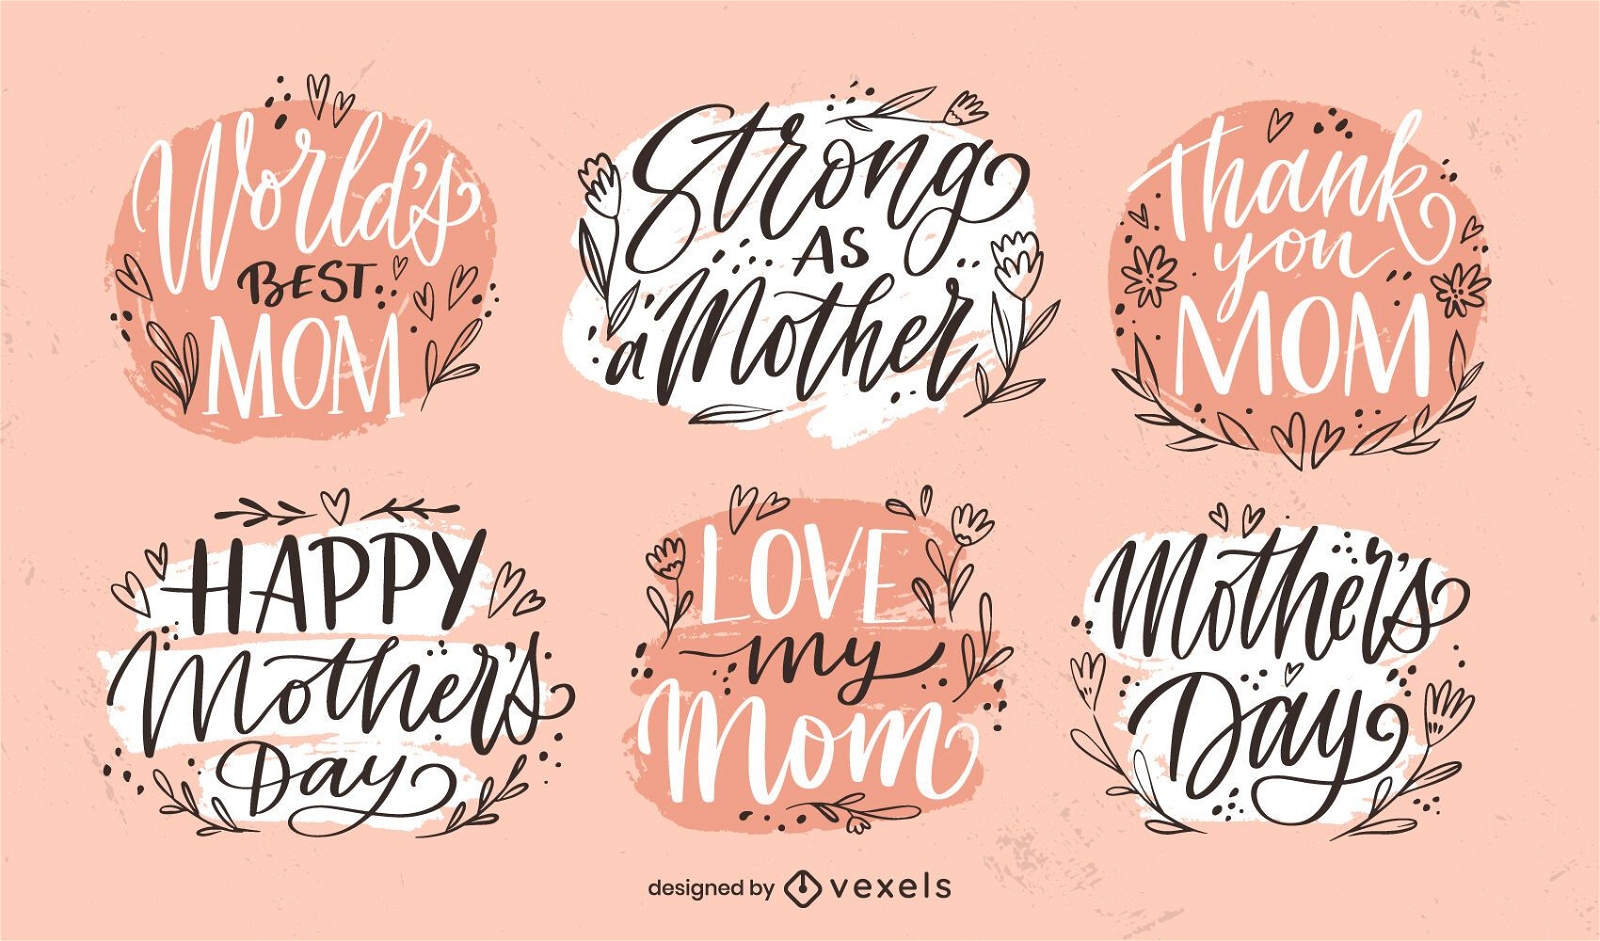 Mother's day badge set